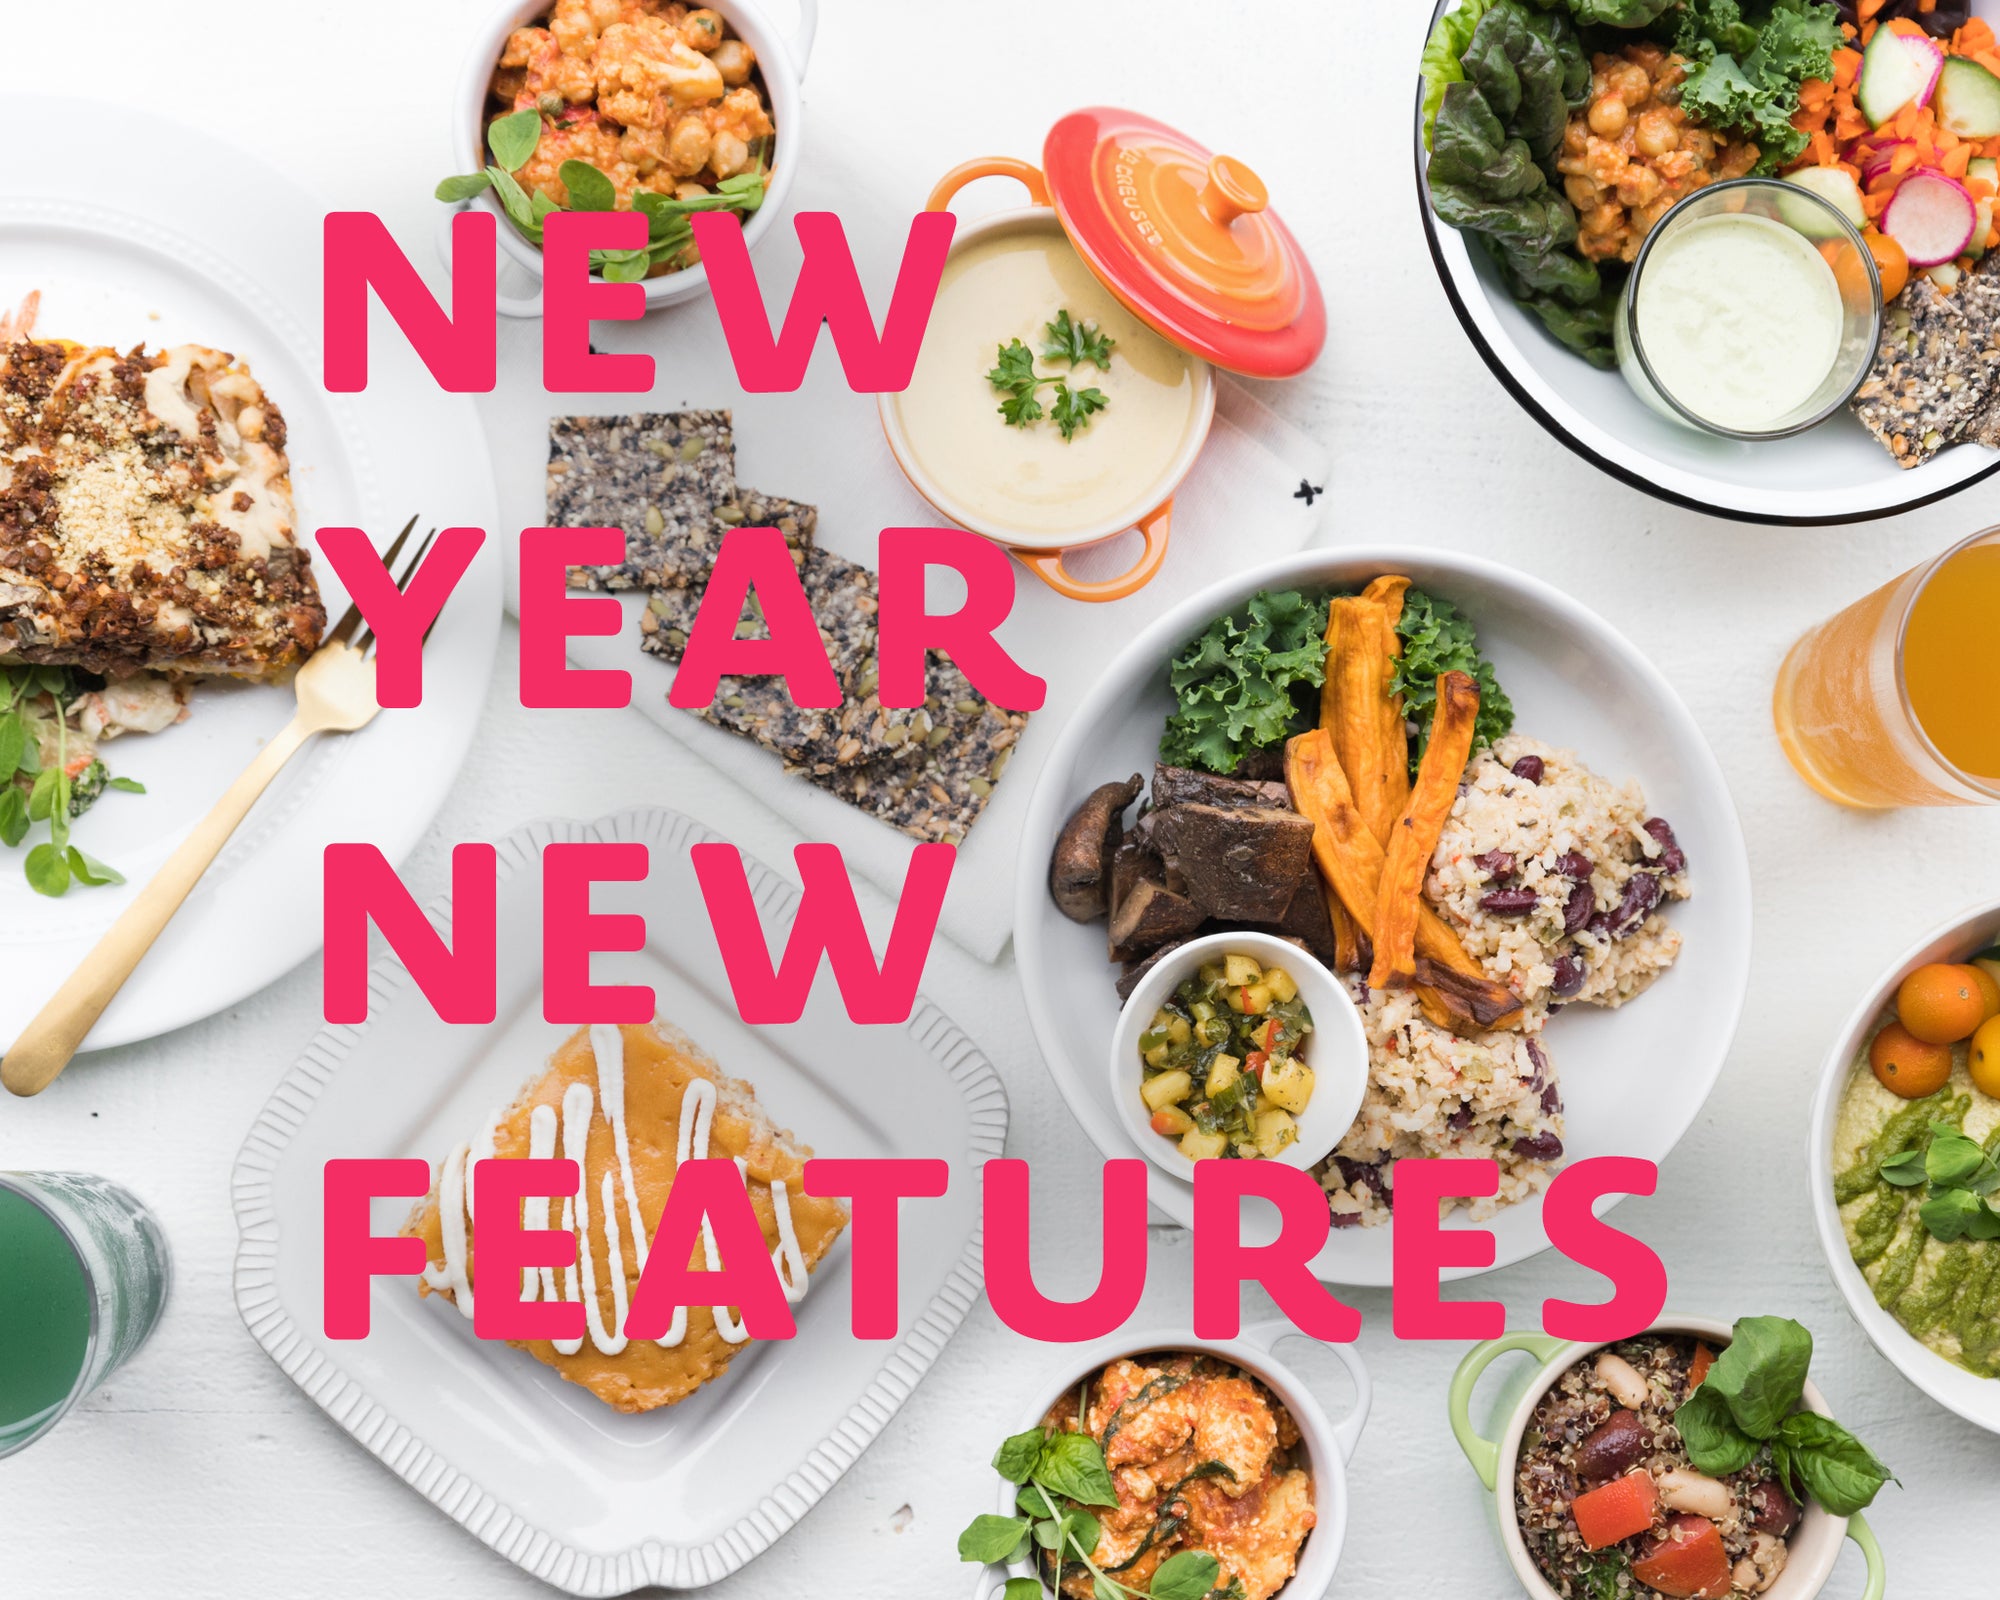 New Year, New Features! A quick guide to some interesting features and menu items you might not know about.